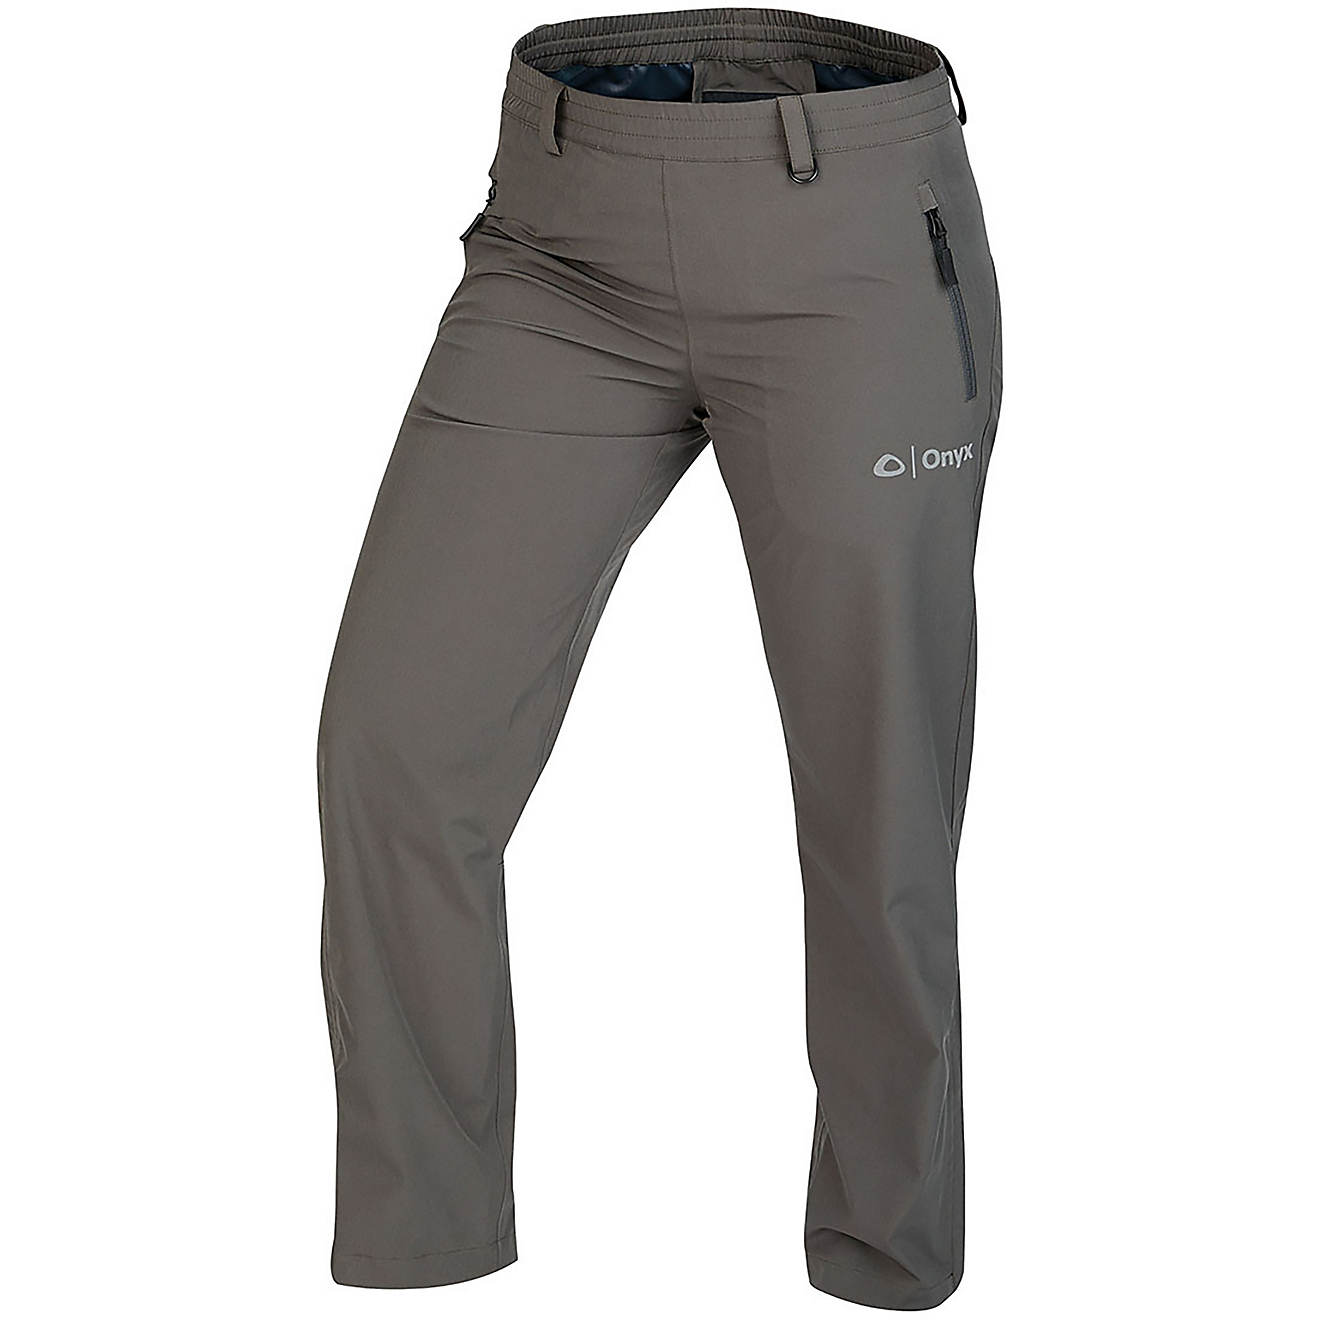 Onyx Outdoor Women's STR Pants | Free Shipping at Academy